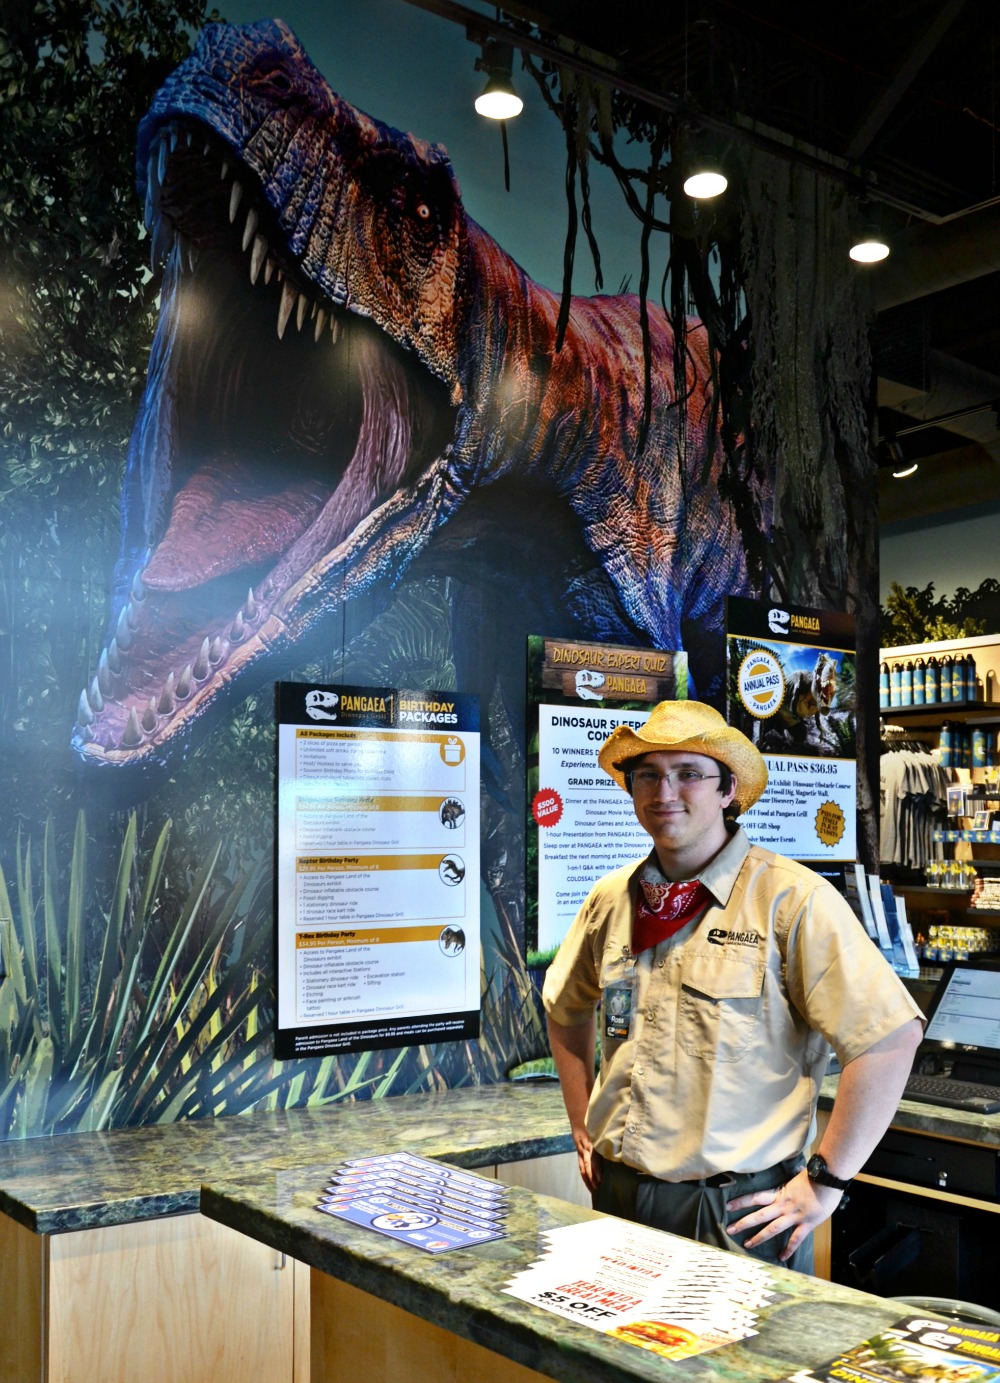 Host the ultimate dinosaur party at Pangaea Land of the Dinosaurs in Scottsdale, Arizona. The friendly staff and guides handle everything!